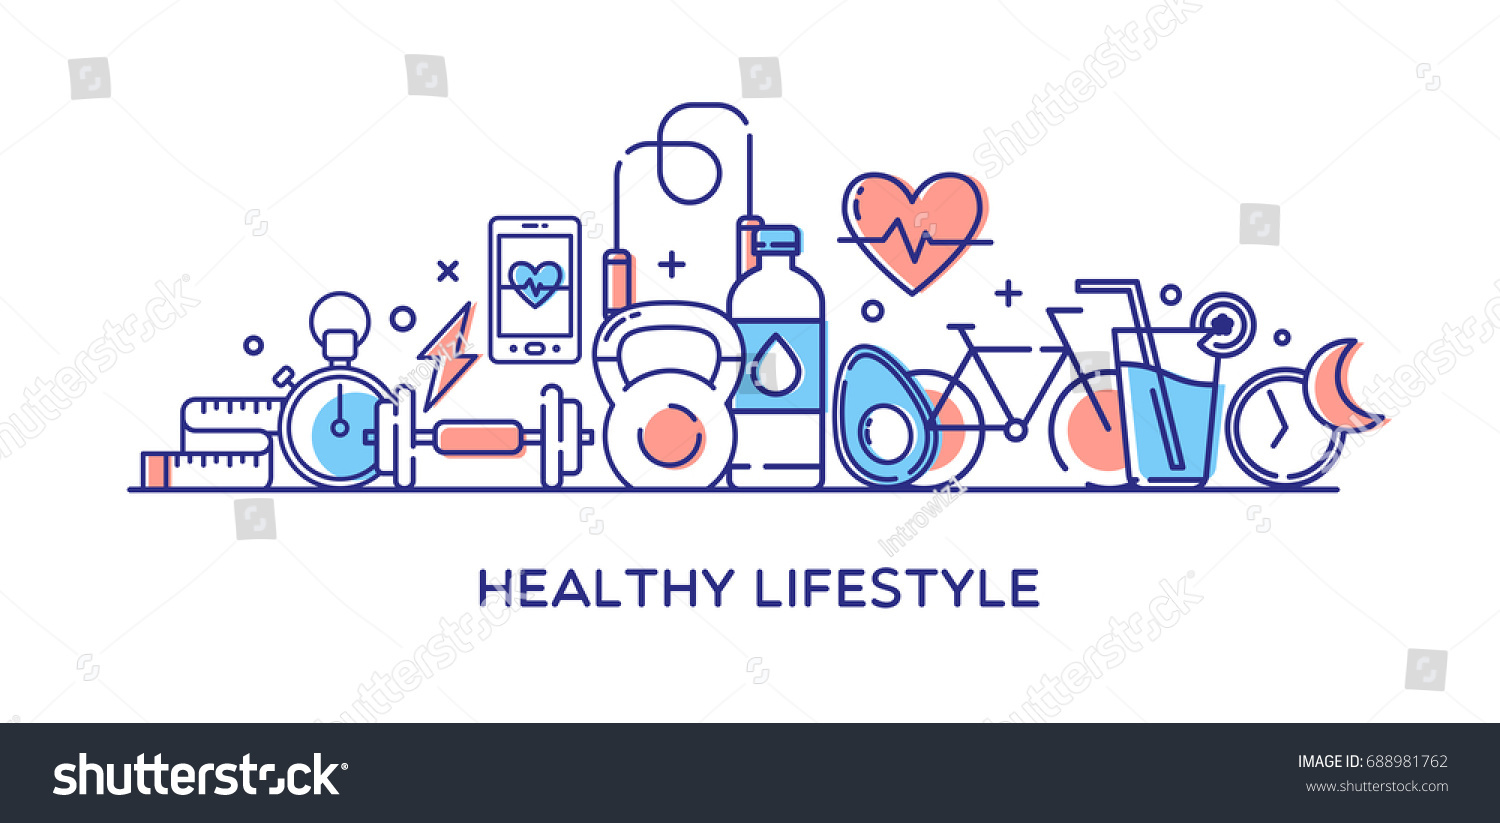 Healthy Lifestyle Vector Illustration, Dieting, Fitness & Nutrition.
 #688981762